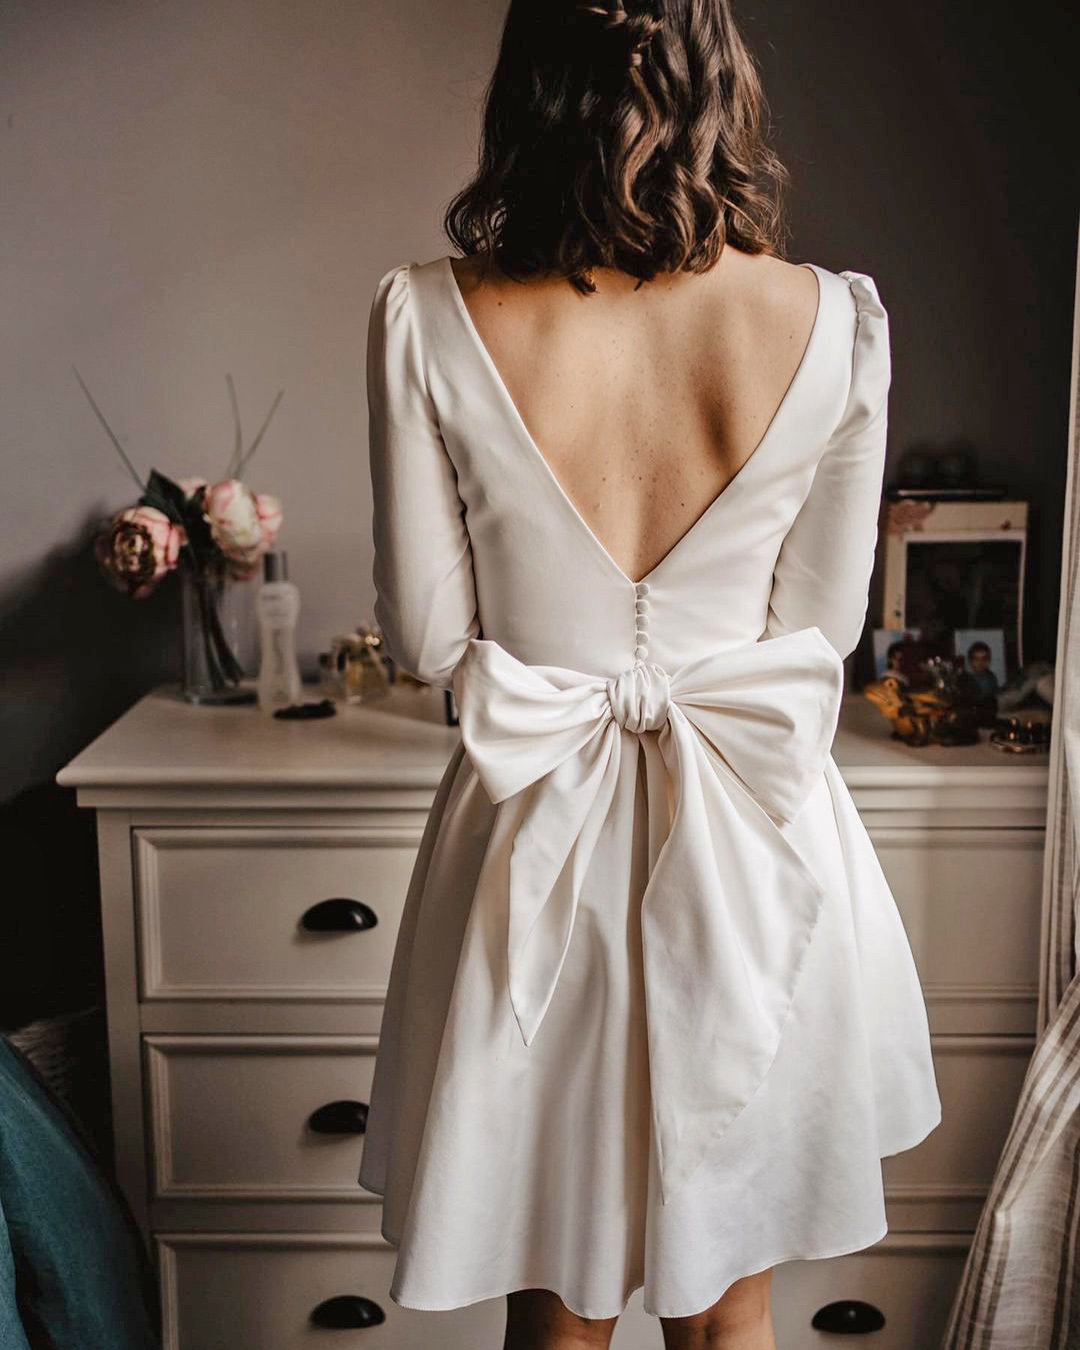 short wedding dresses simple v back with long sleeves marielaportecreatrice